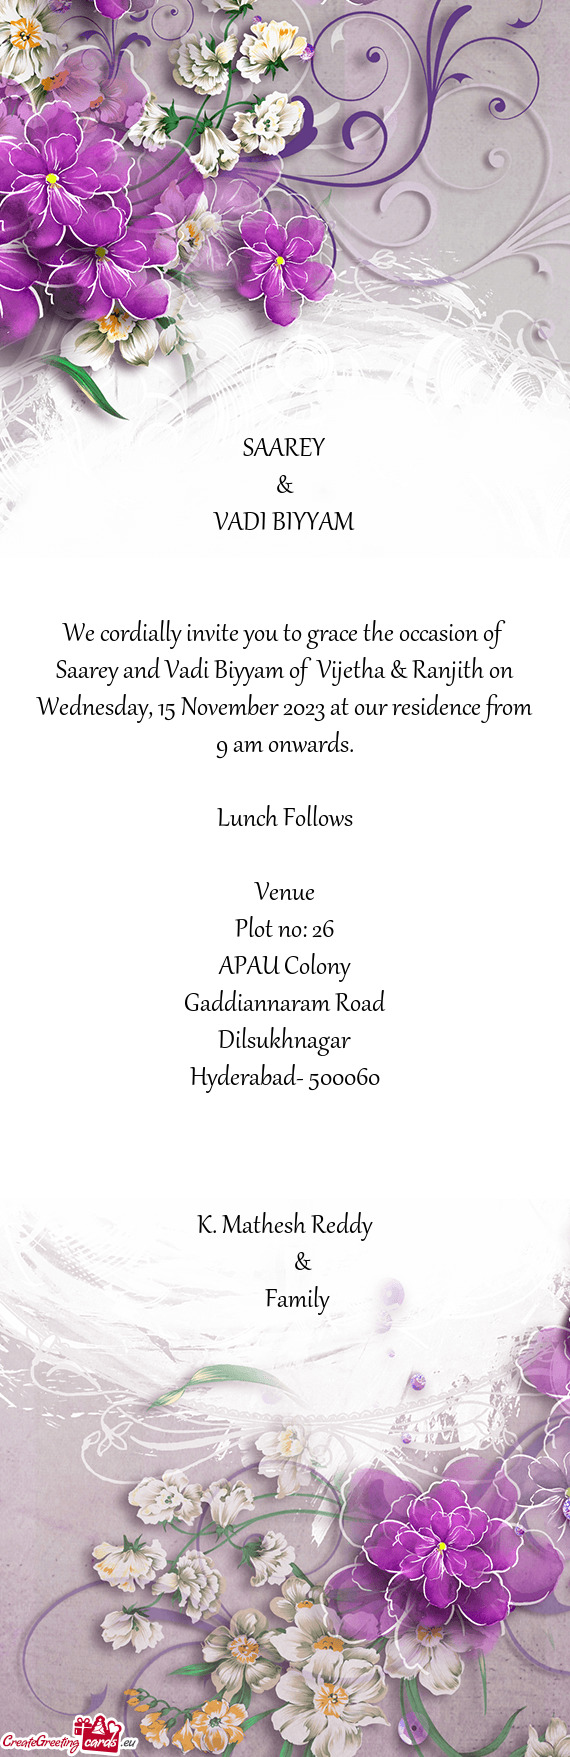 Nesday, 15 November 2023 at our residence from 9 am onwards